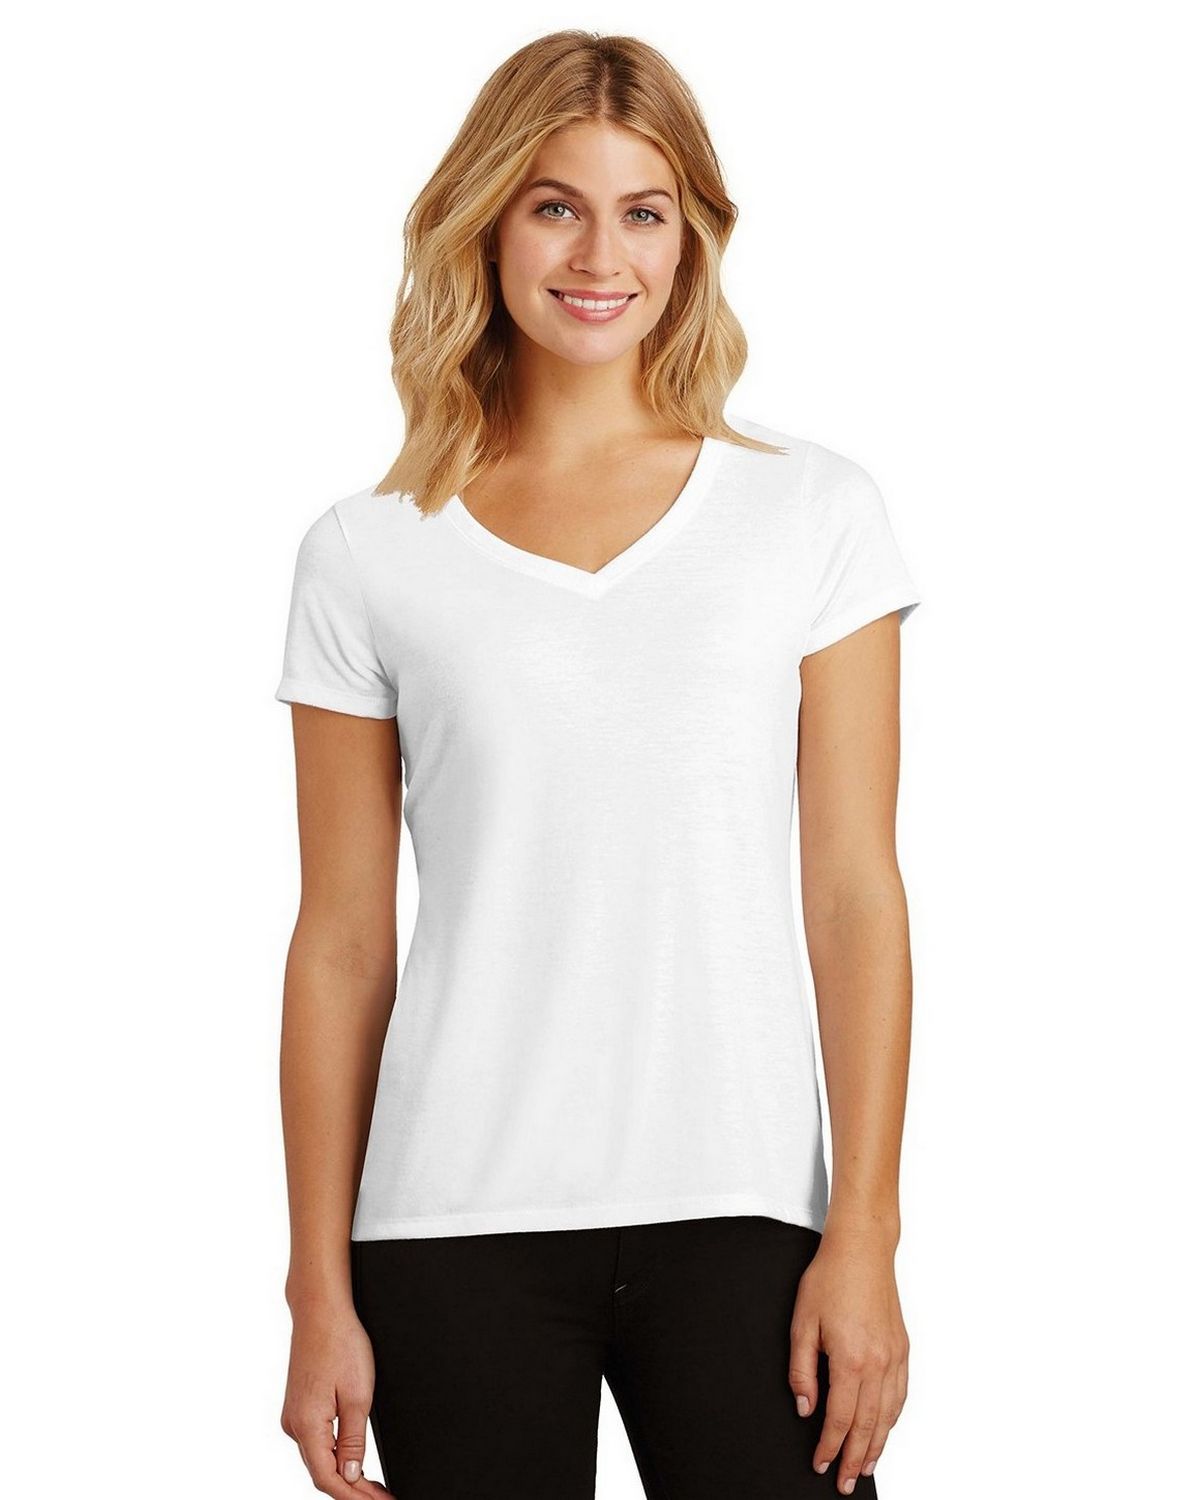 Size Chart for District DM1350L Ladies Perfect Tri V-Neck Tee